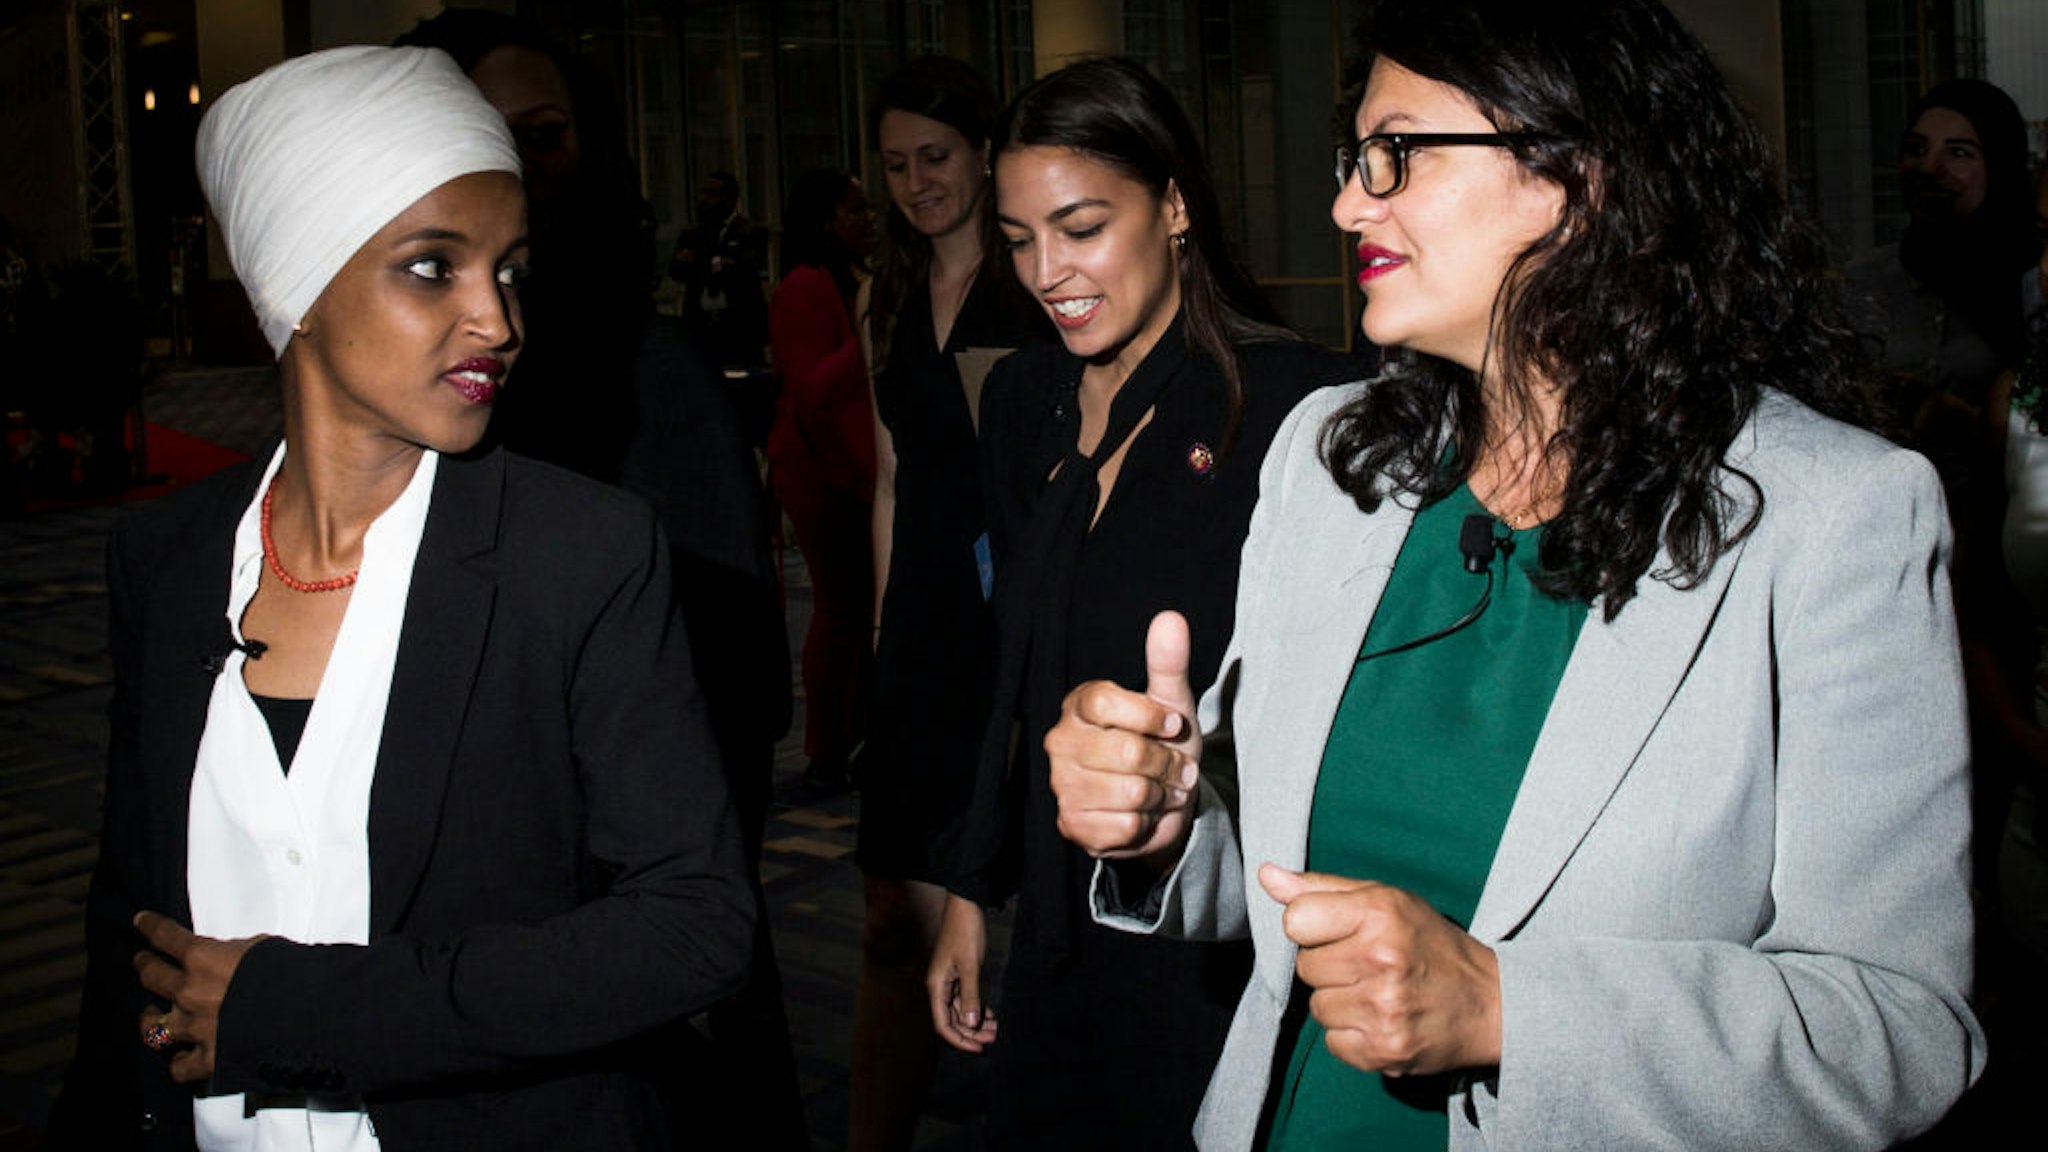 p. Ilhan Omar (D-MN), Rep. Alexandria Ocasio-Cortez (D-NY) and Rep. Rashida Tlaib (D-MI) arrive before participating during a town hall hosted by the NAACP on September 11, 2019 in Washington, DC.